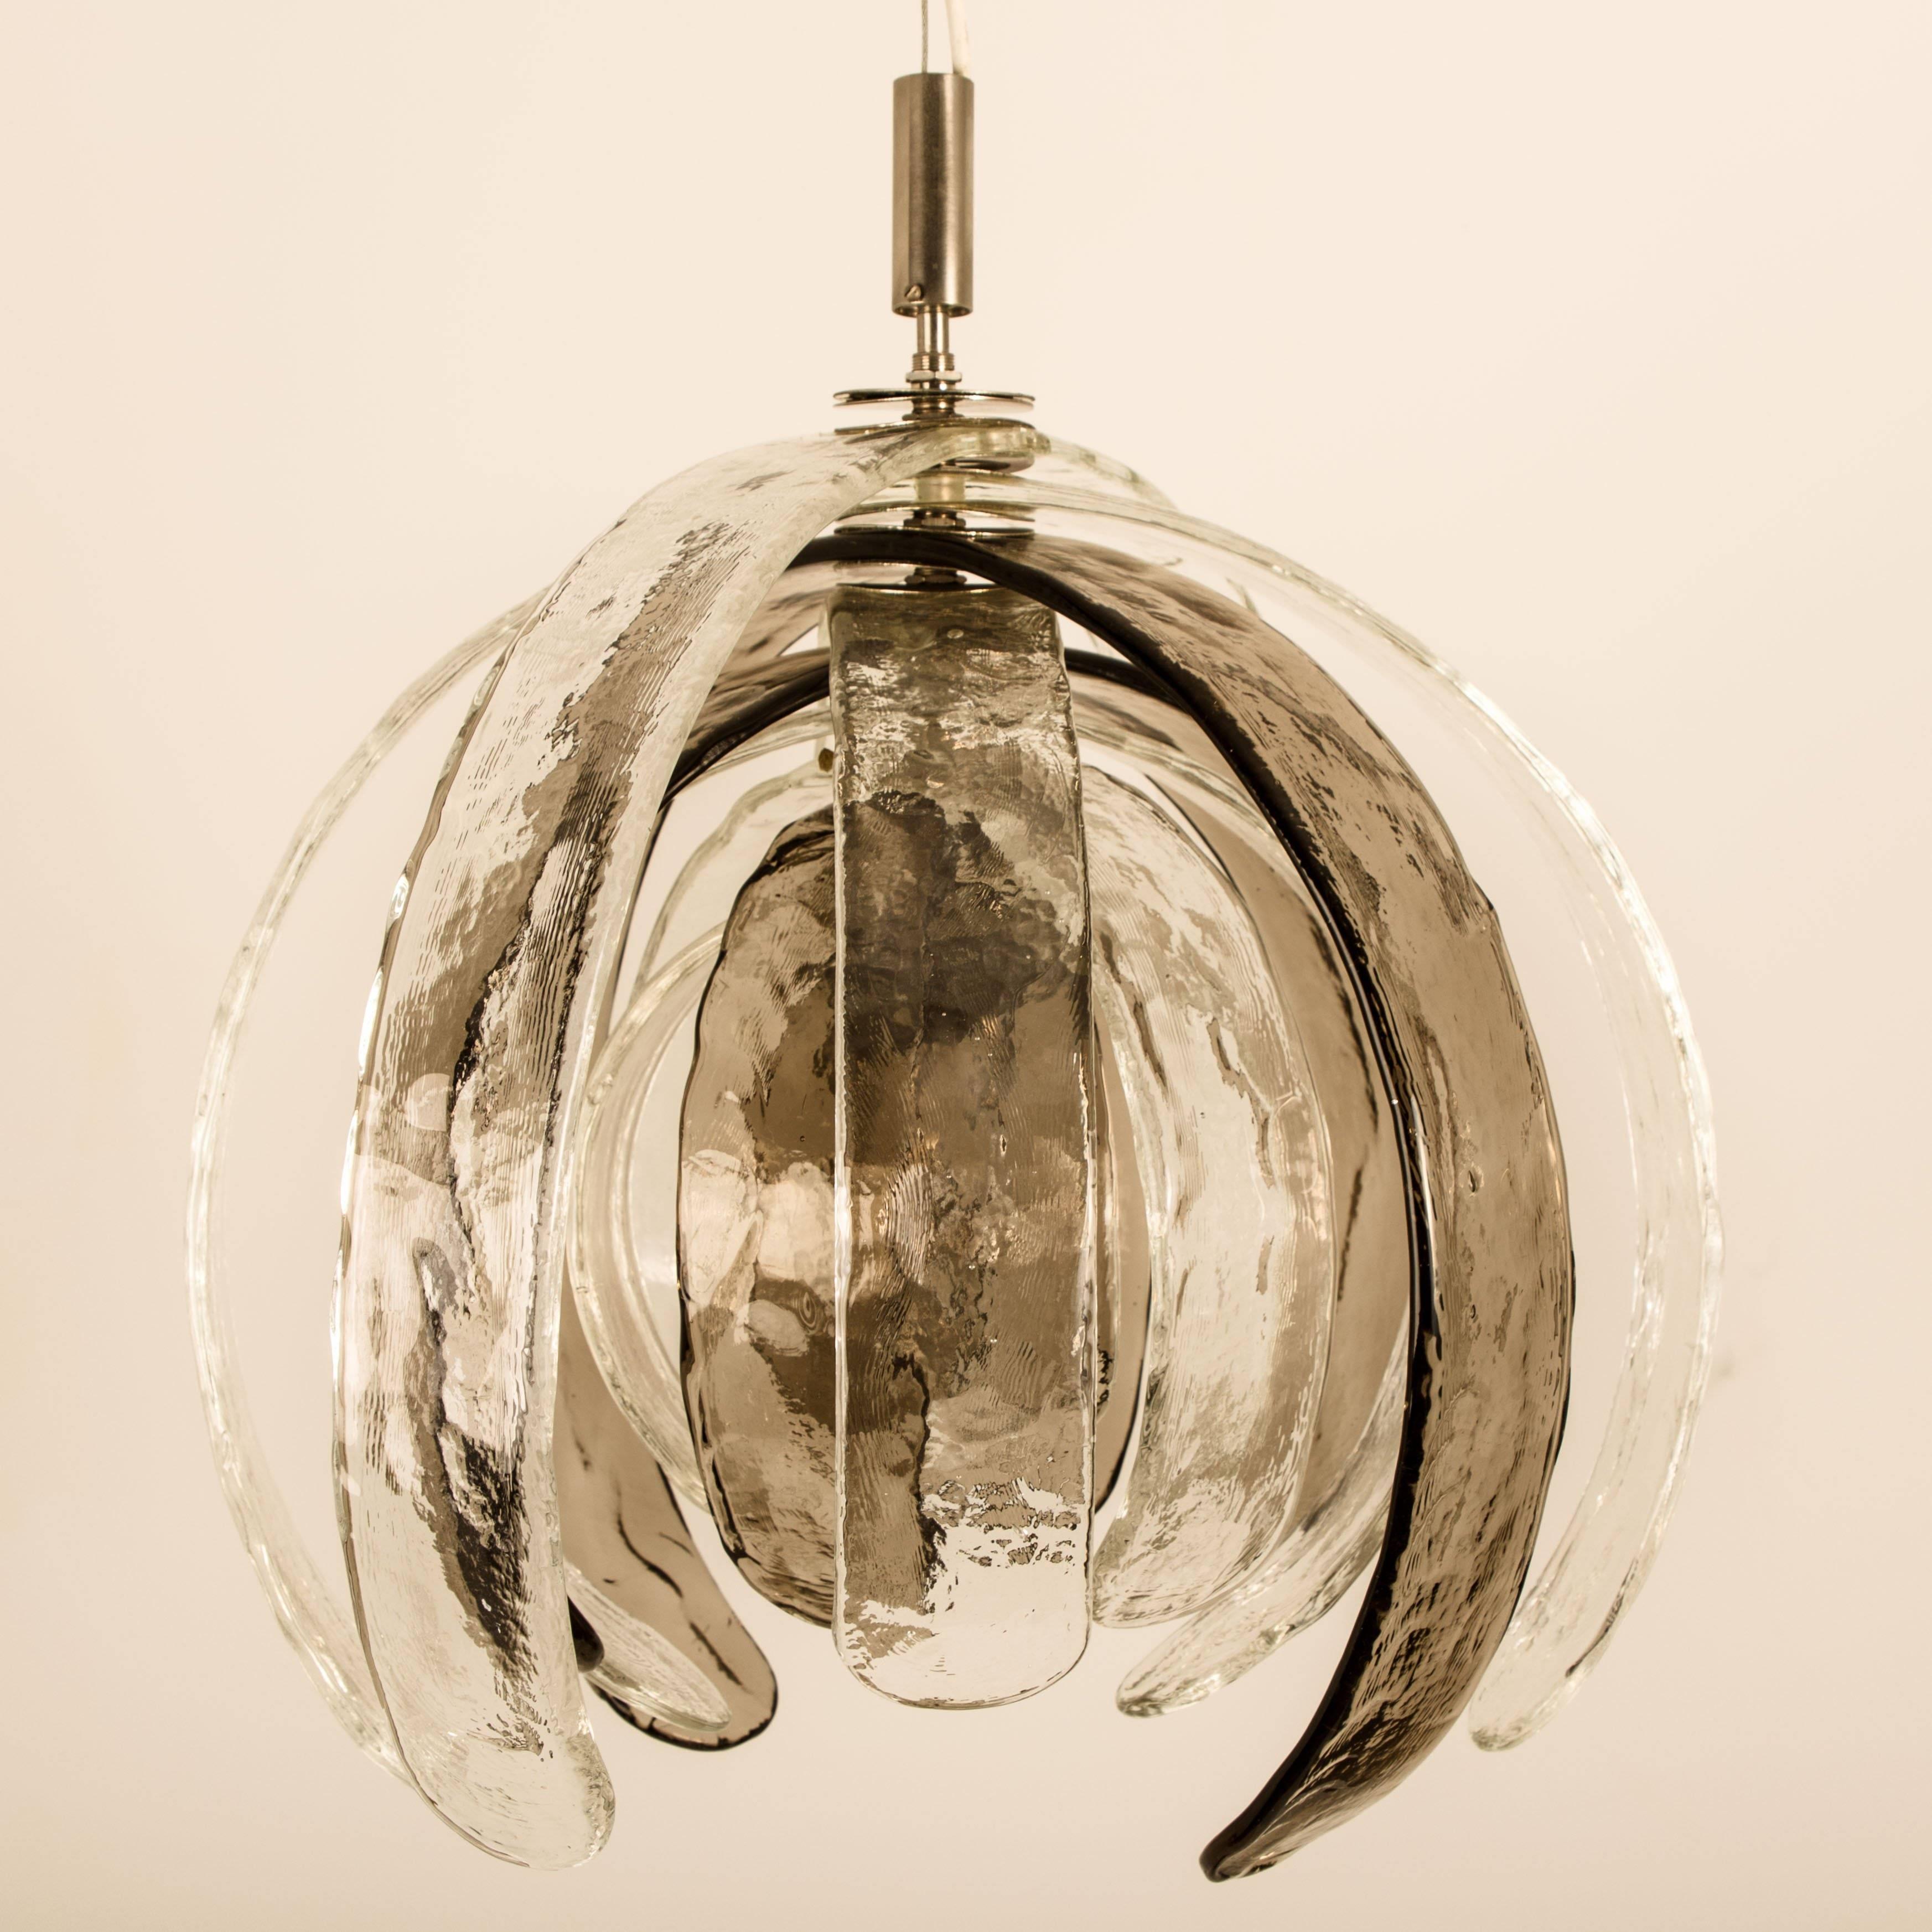 High-end sculptural artichoke chandelier by Carlo Nason for Mazzega. Thick clear and bronze textured glass blades. The blades can be put in the position of one line as unfolding into a flower.

This is the largest size, The 12 handmade Murano